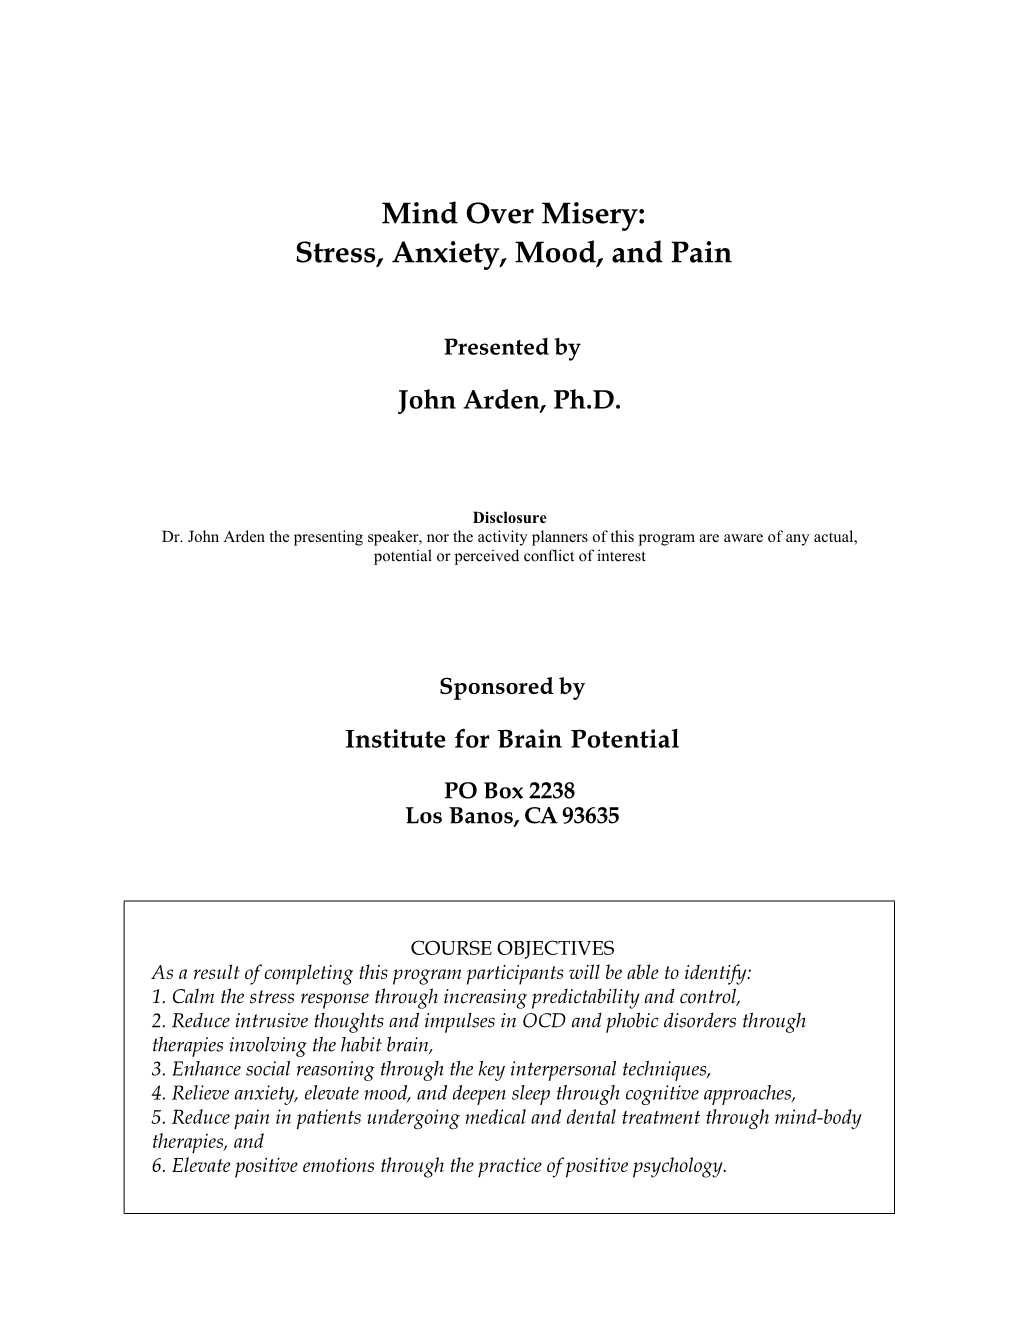 Mind Over Misery: Stress, Anxiety, Mood, and Pain